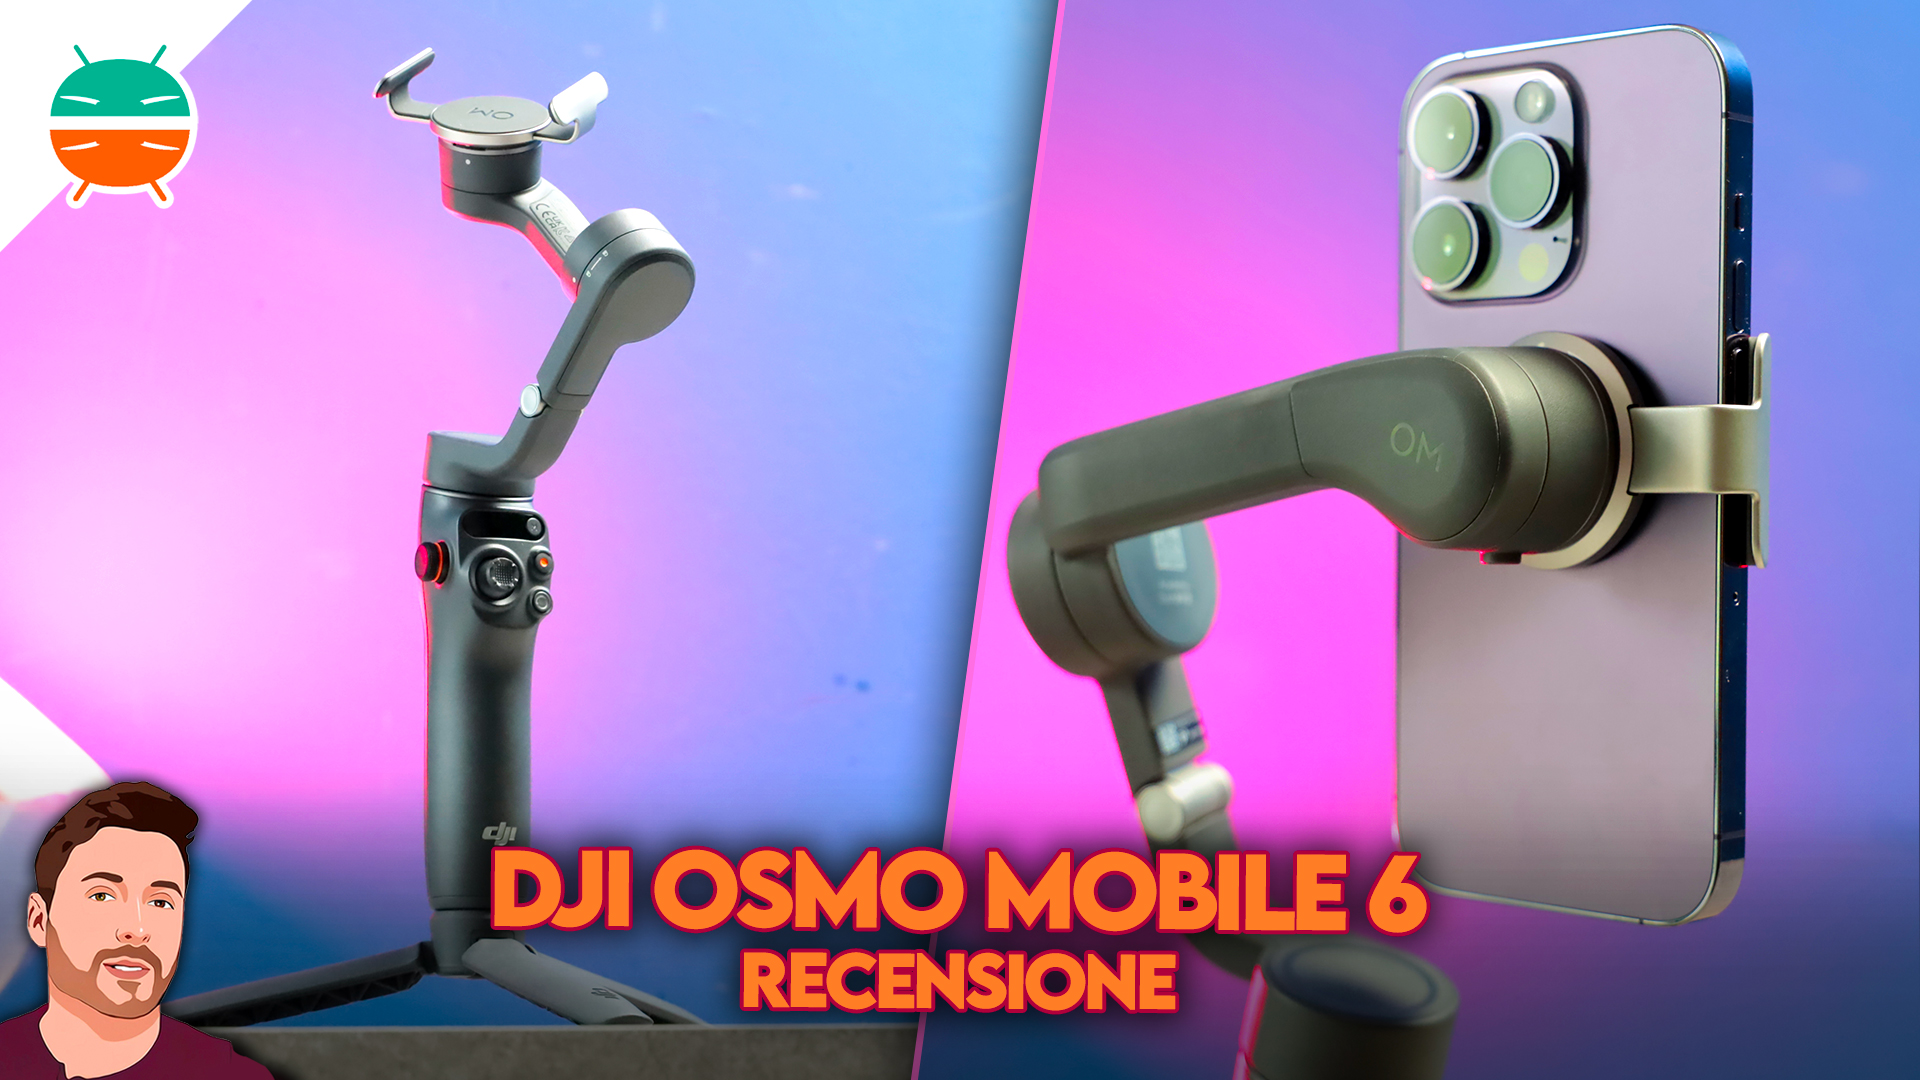 DJI Osmo Mobile 6 review: The best smartphone gimbal gets even better